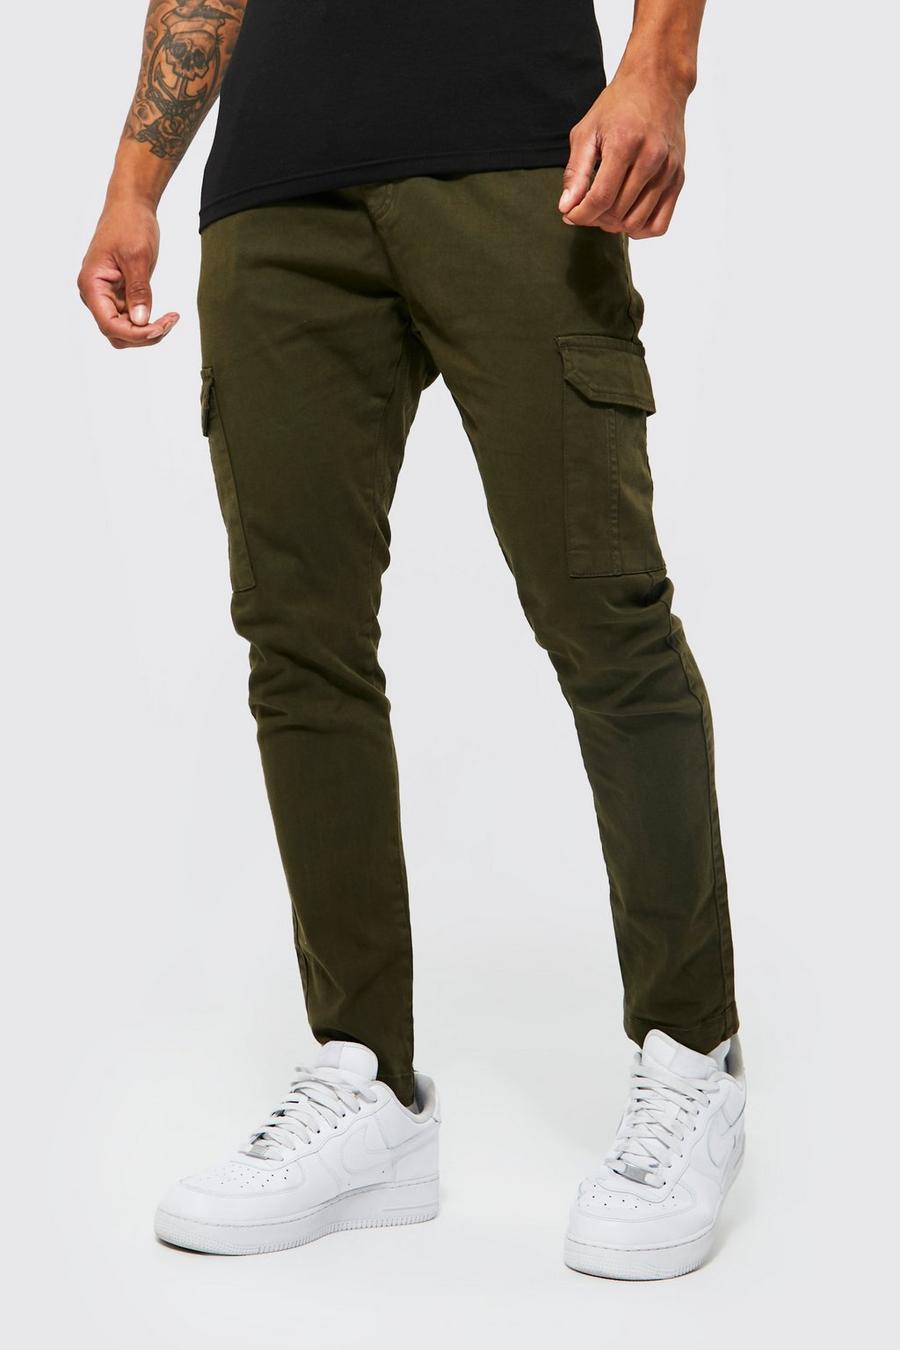 Olive Elastic Waist Slim Fit Drawcord Cargo Trouser image number 1